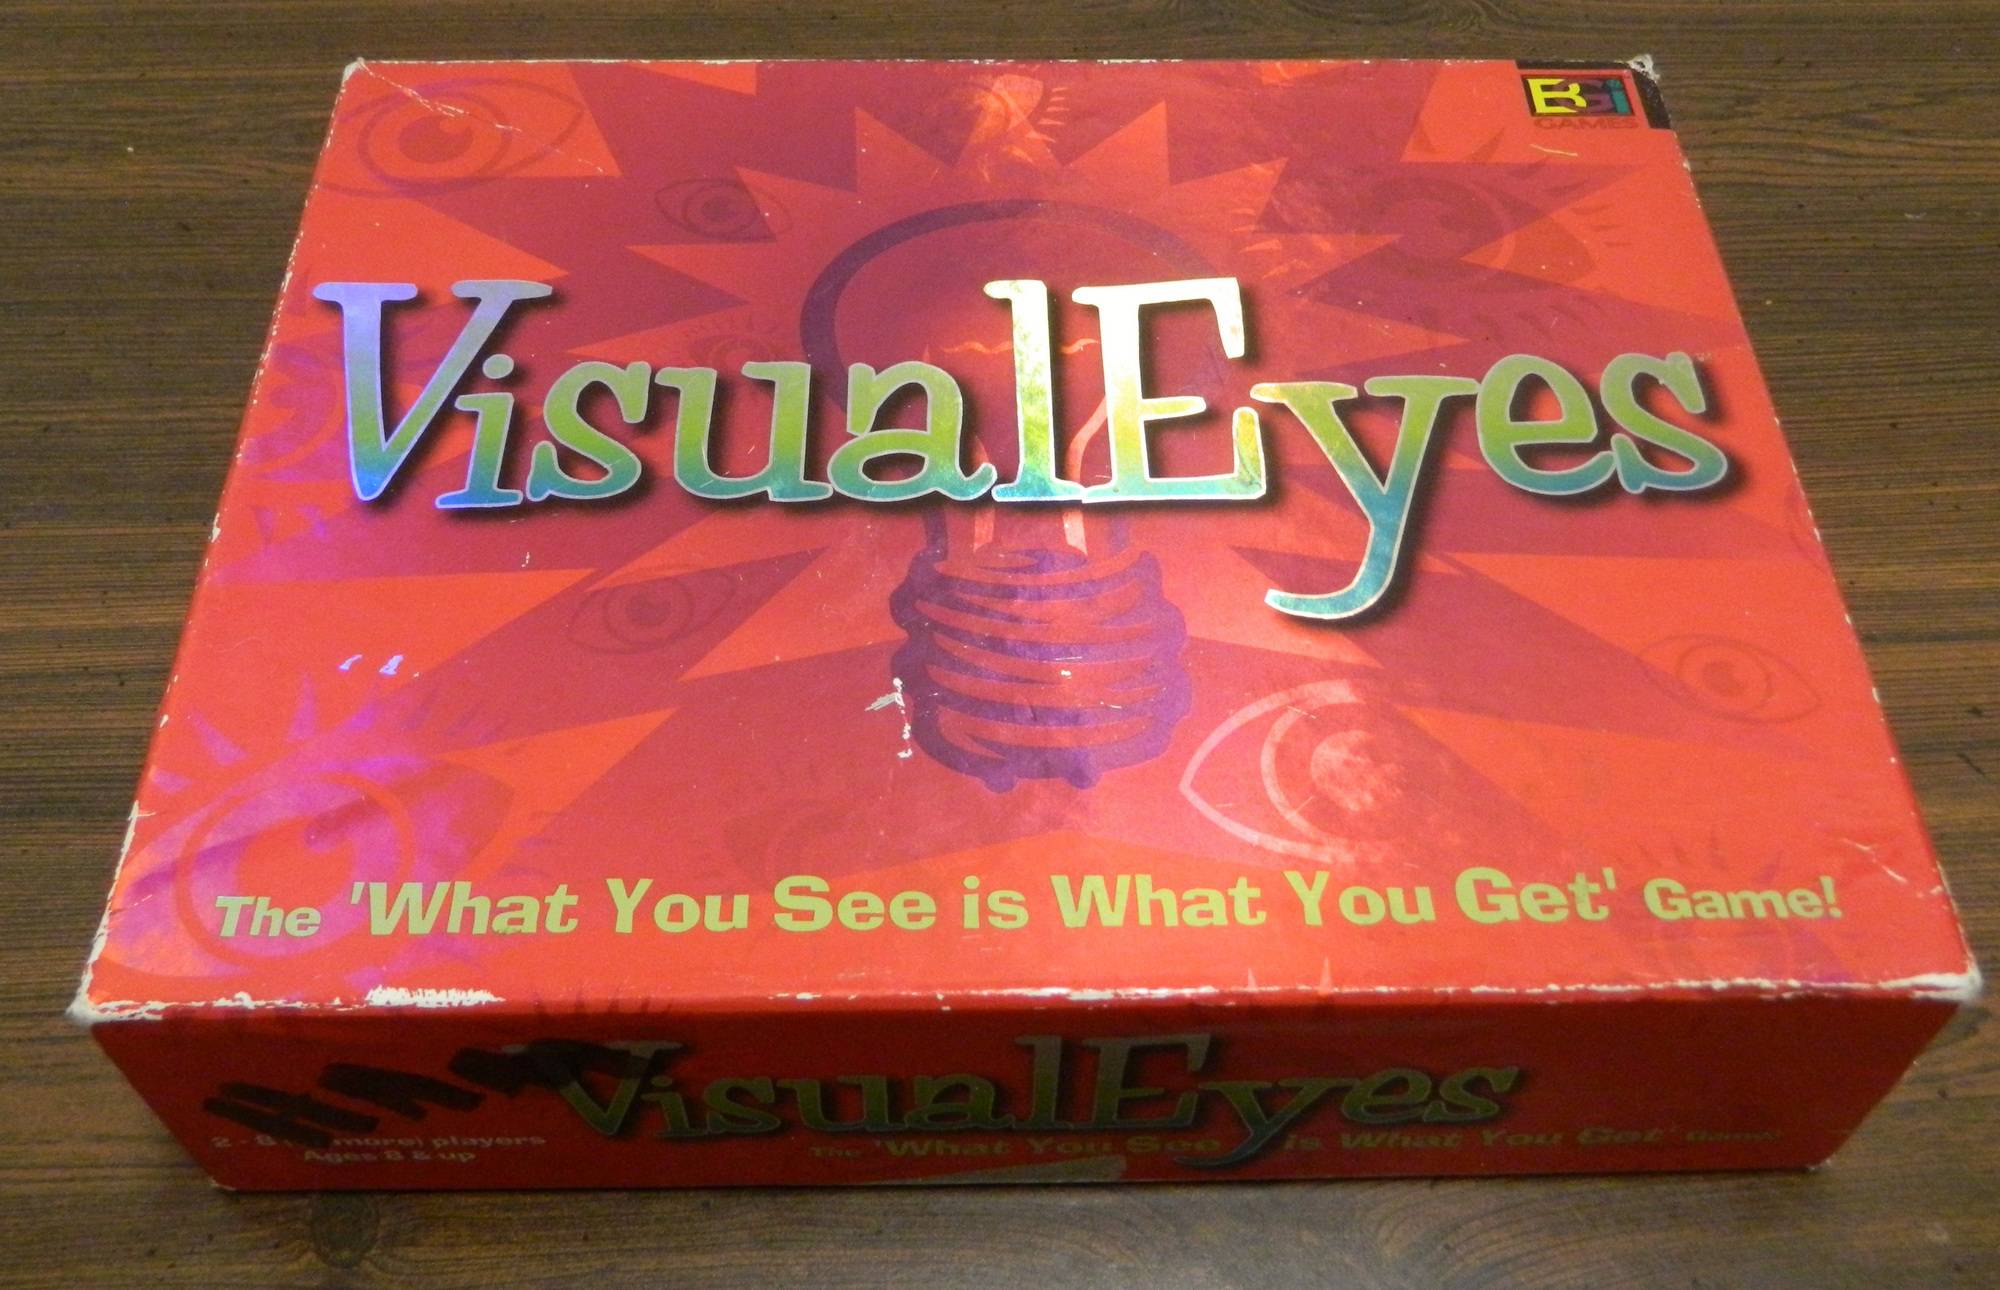 S3 for sale online Visual Eyes Board Game Buffalo Games See Pictures 